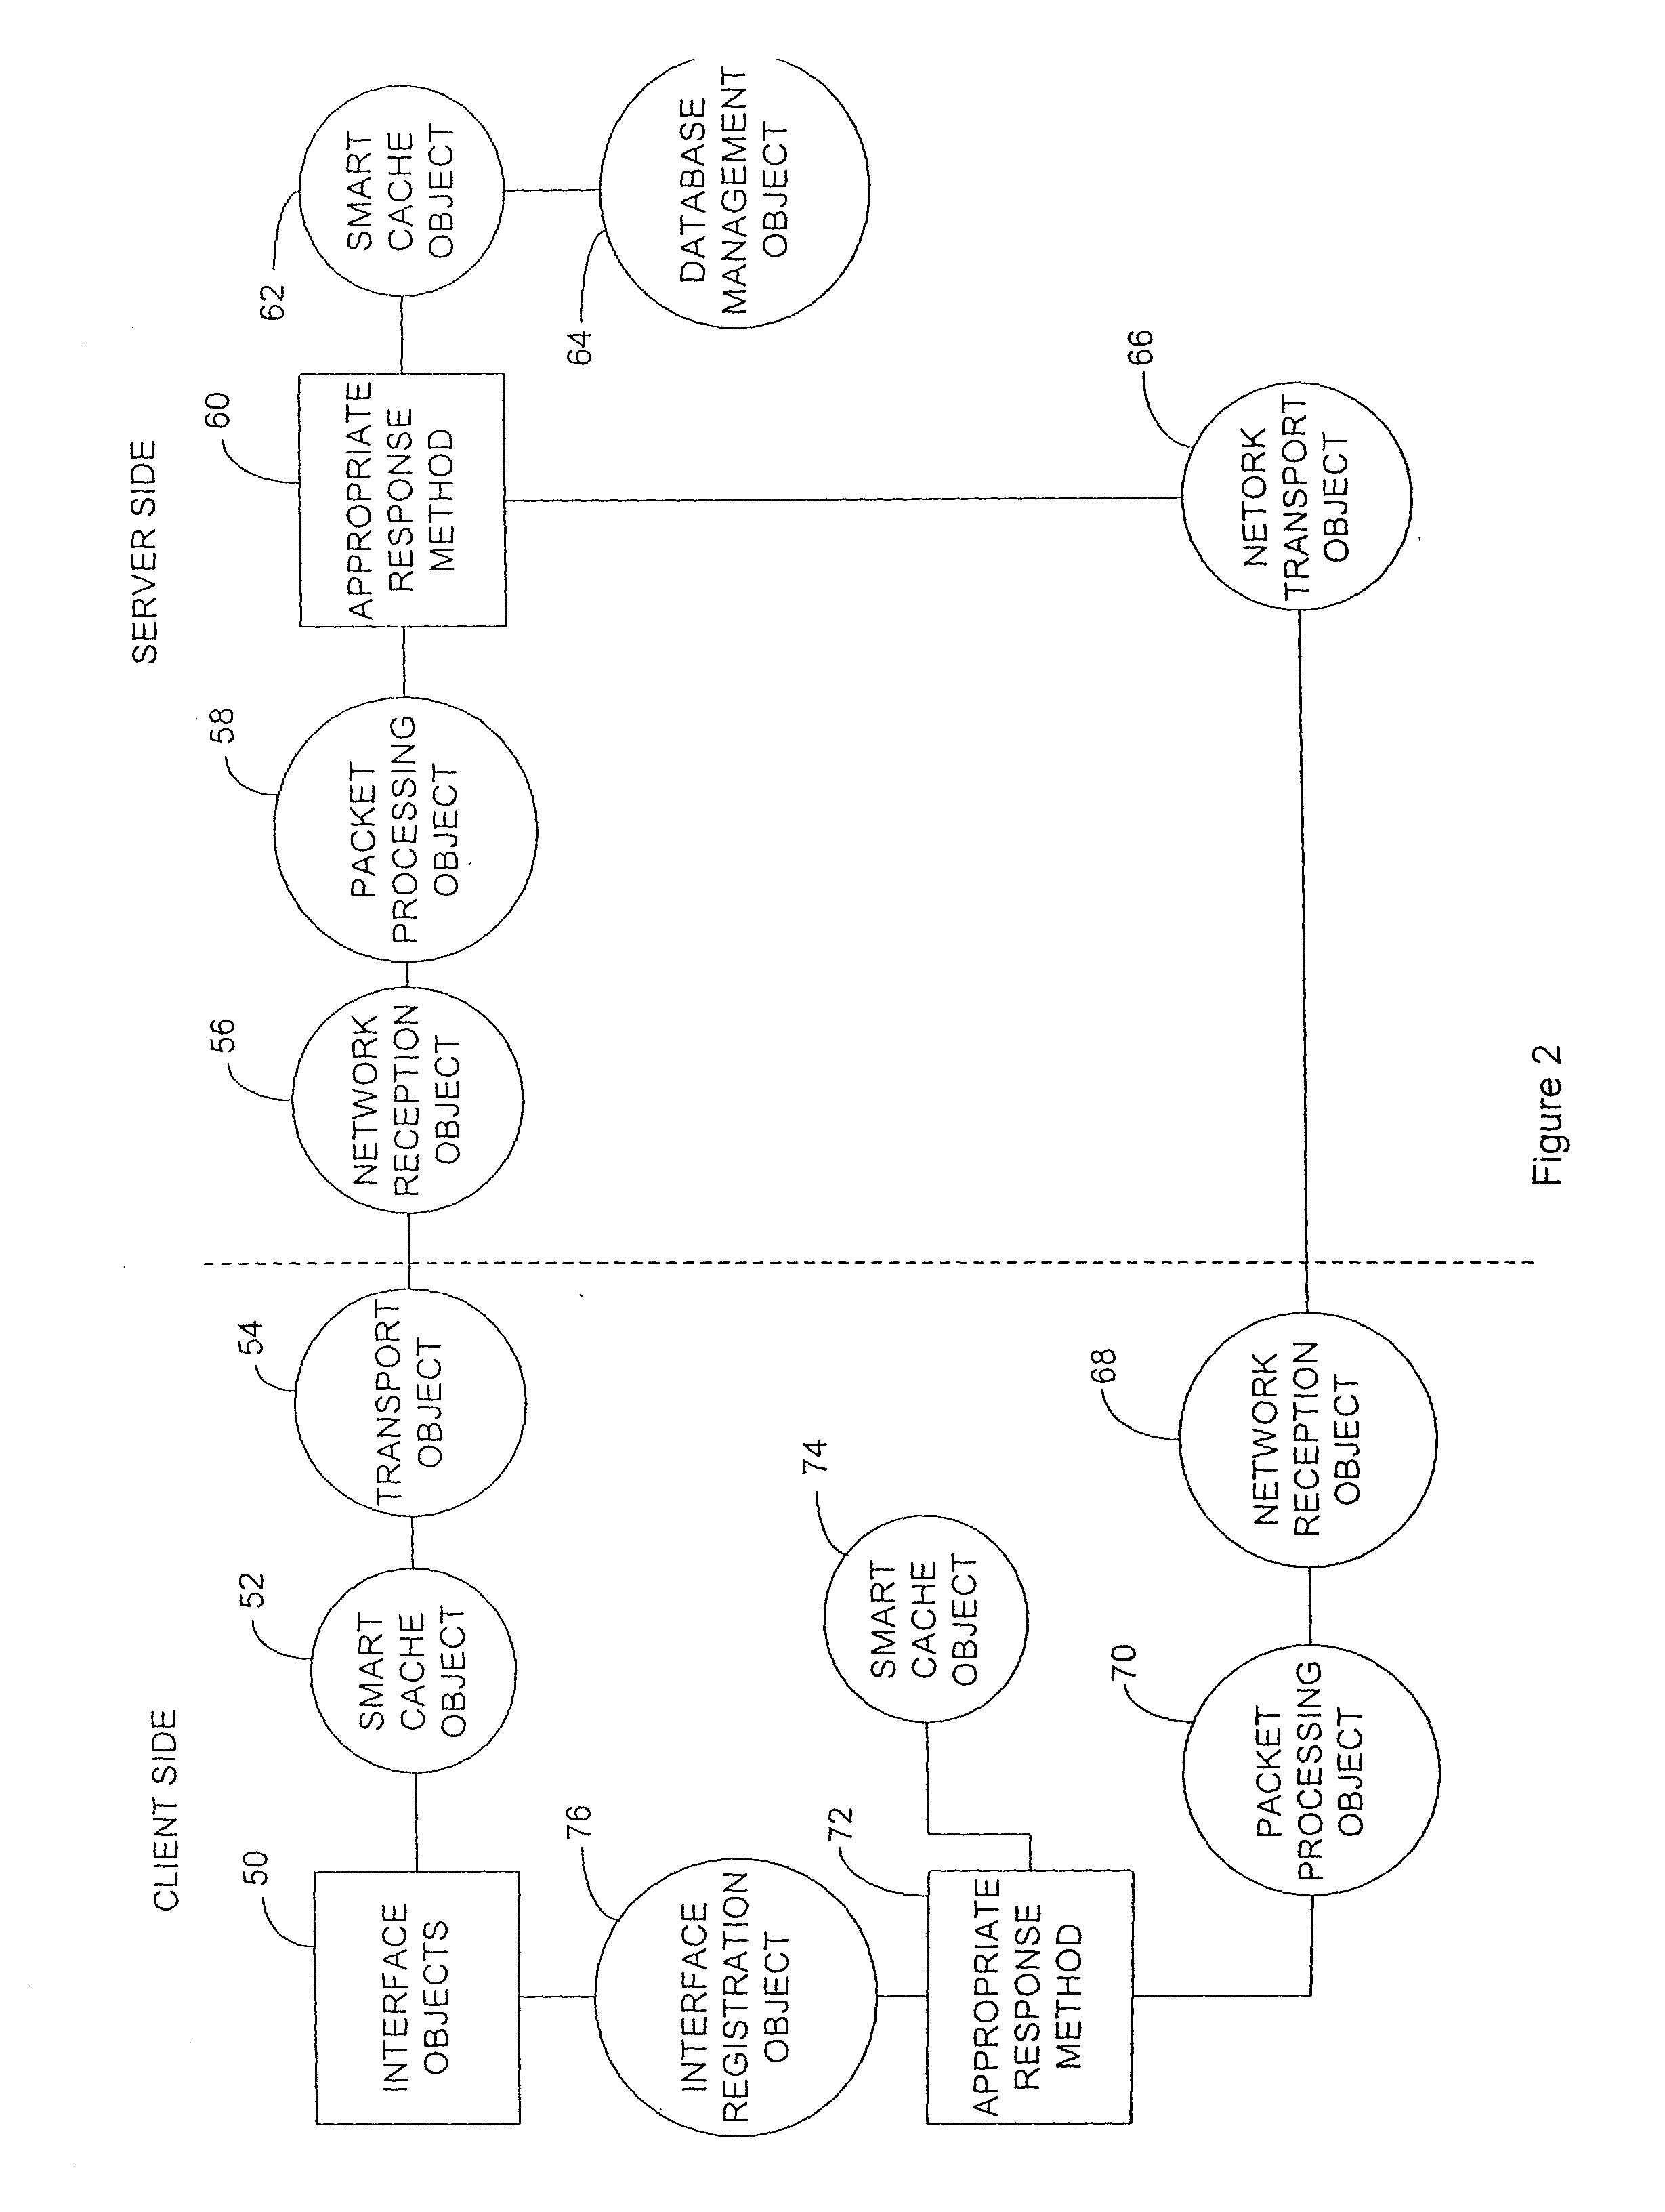 Method and system for managing information on a network